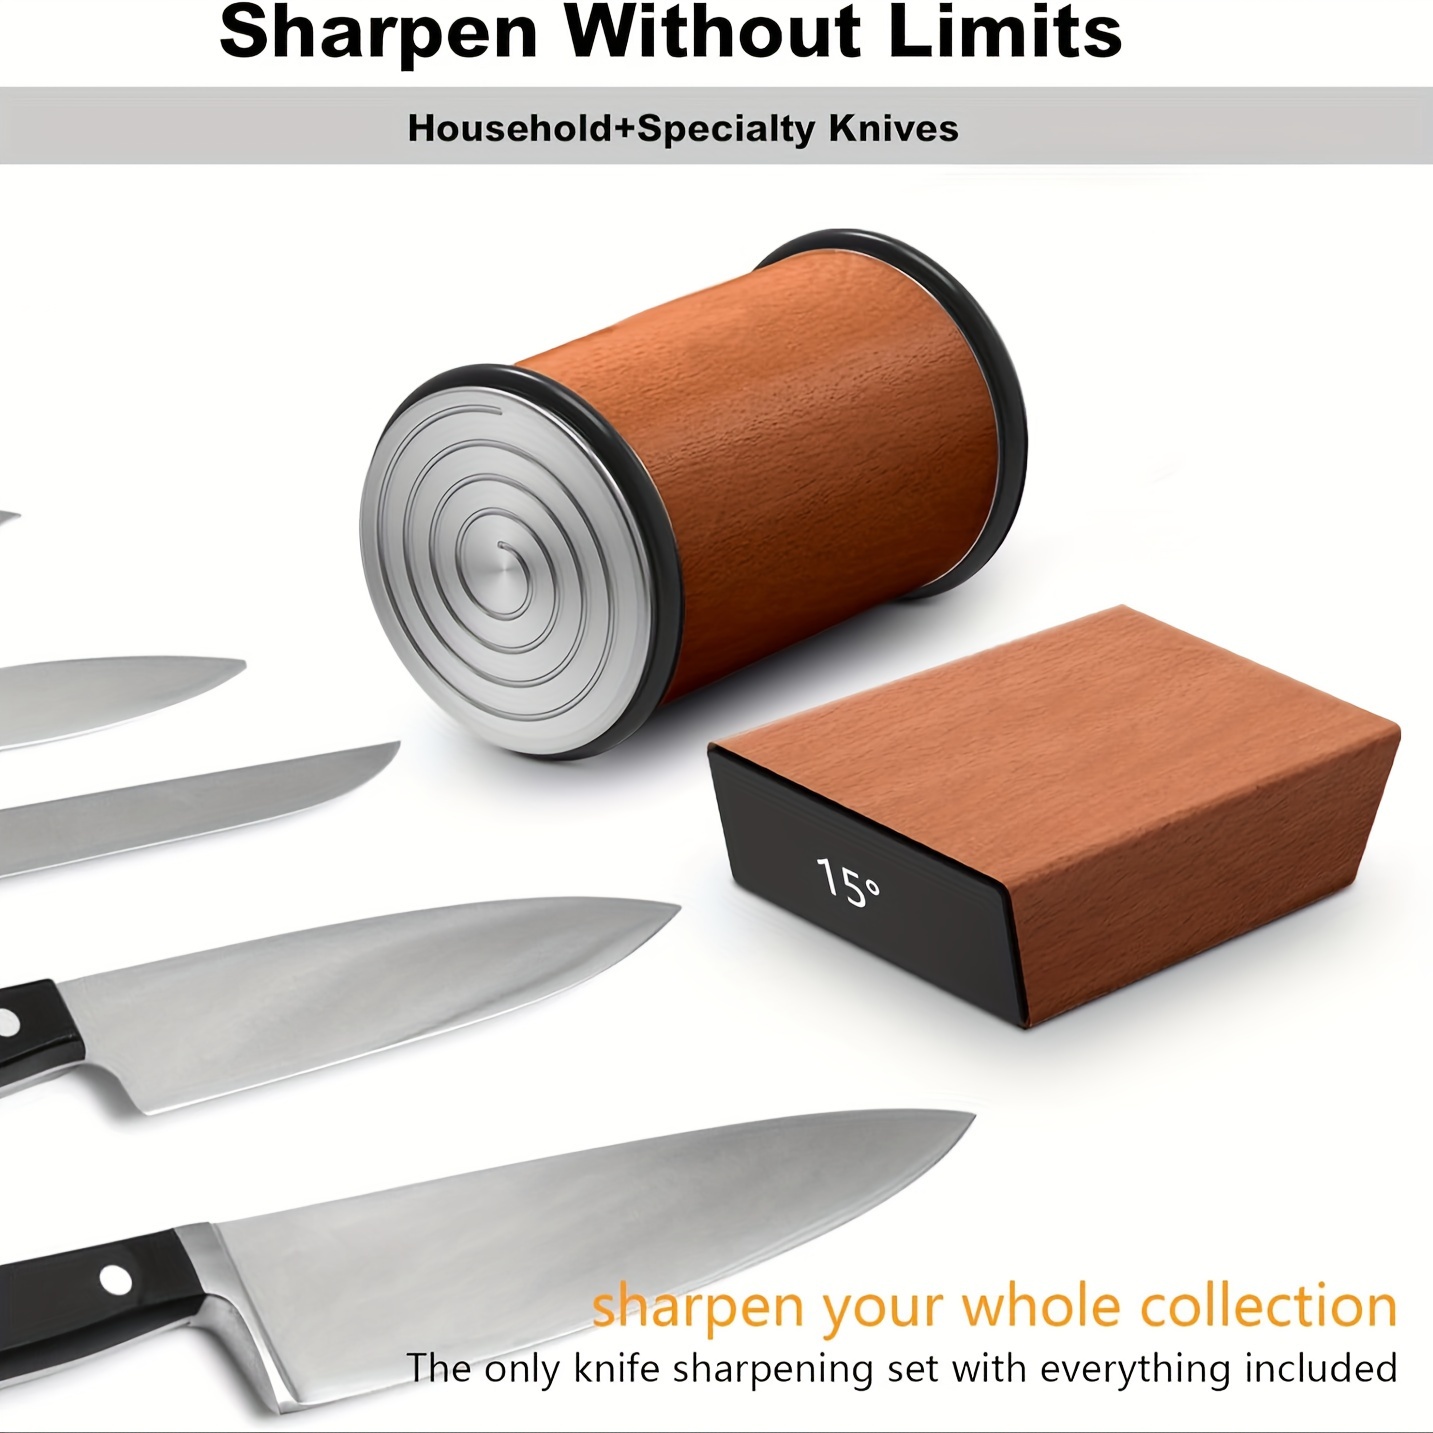 Set, Knife Sharpening, Knife Sharpener, Tumbler Rolling Knife Sharpener,  Rolling Knives Sharpeners, For Straight Blades And Any Hardness Of  Industrial